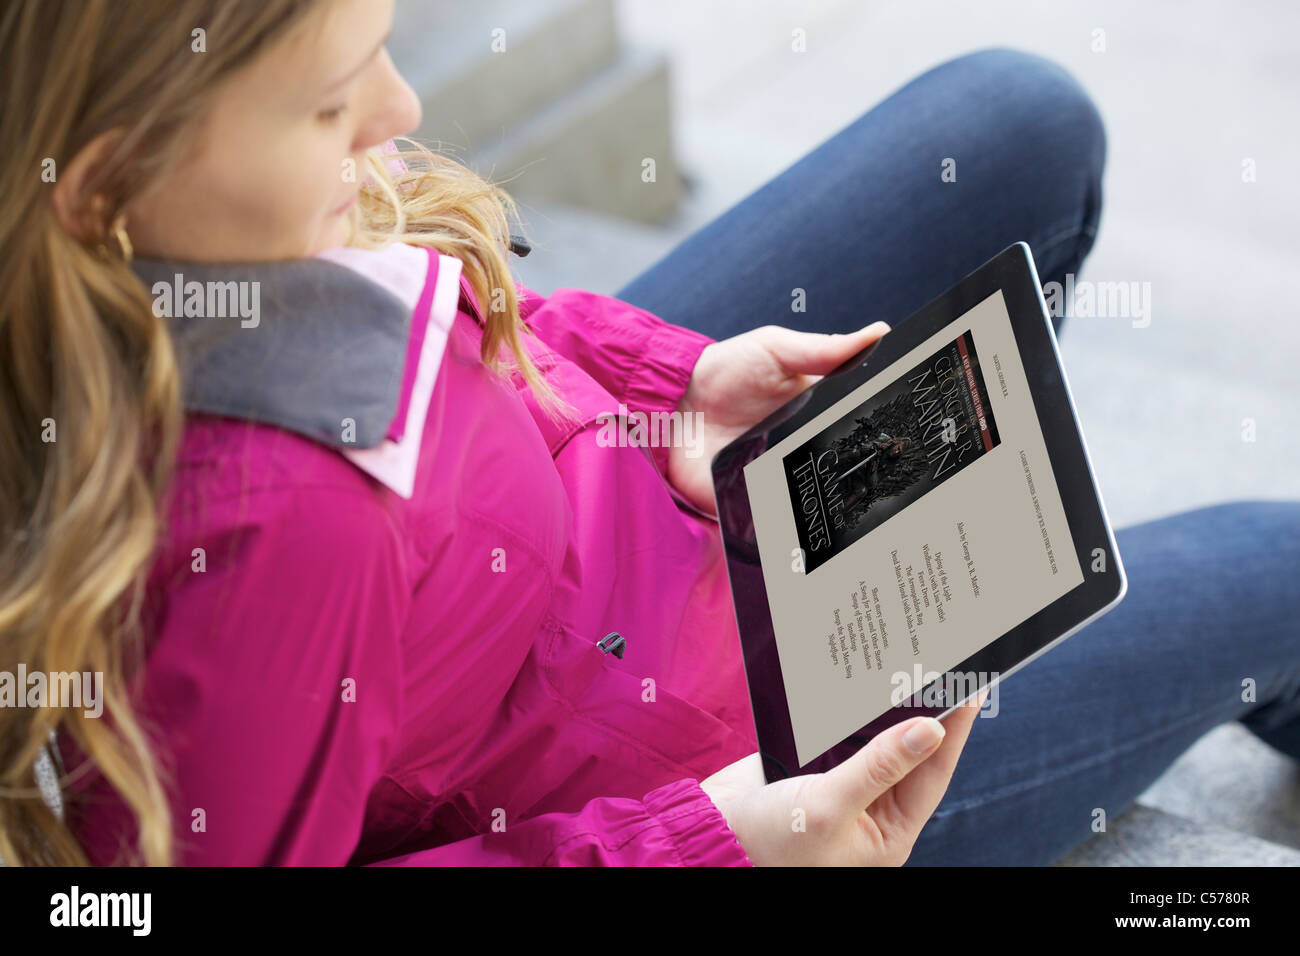 Close up view of a Caucasian young woman reading 'A Game of Thrones' book from Kindle Ipad 2 application Stock Photo